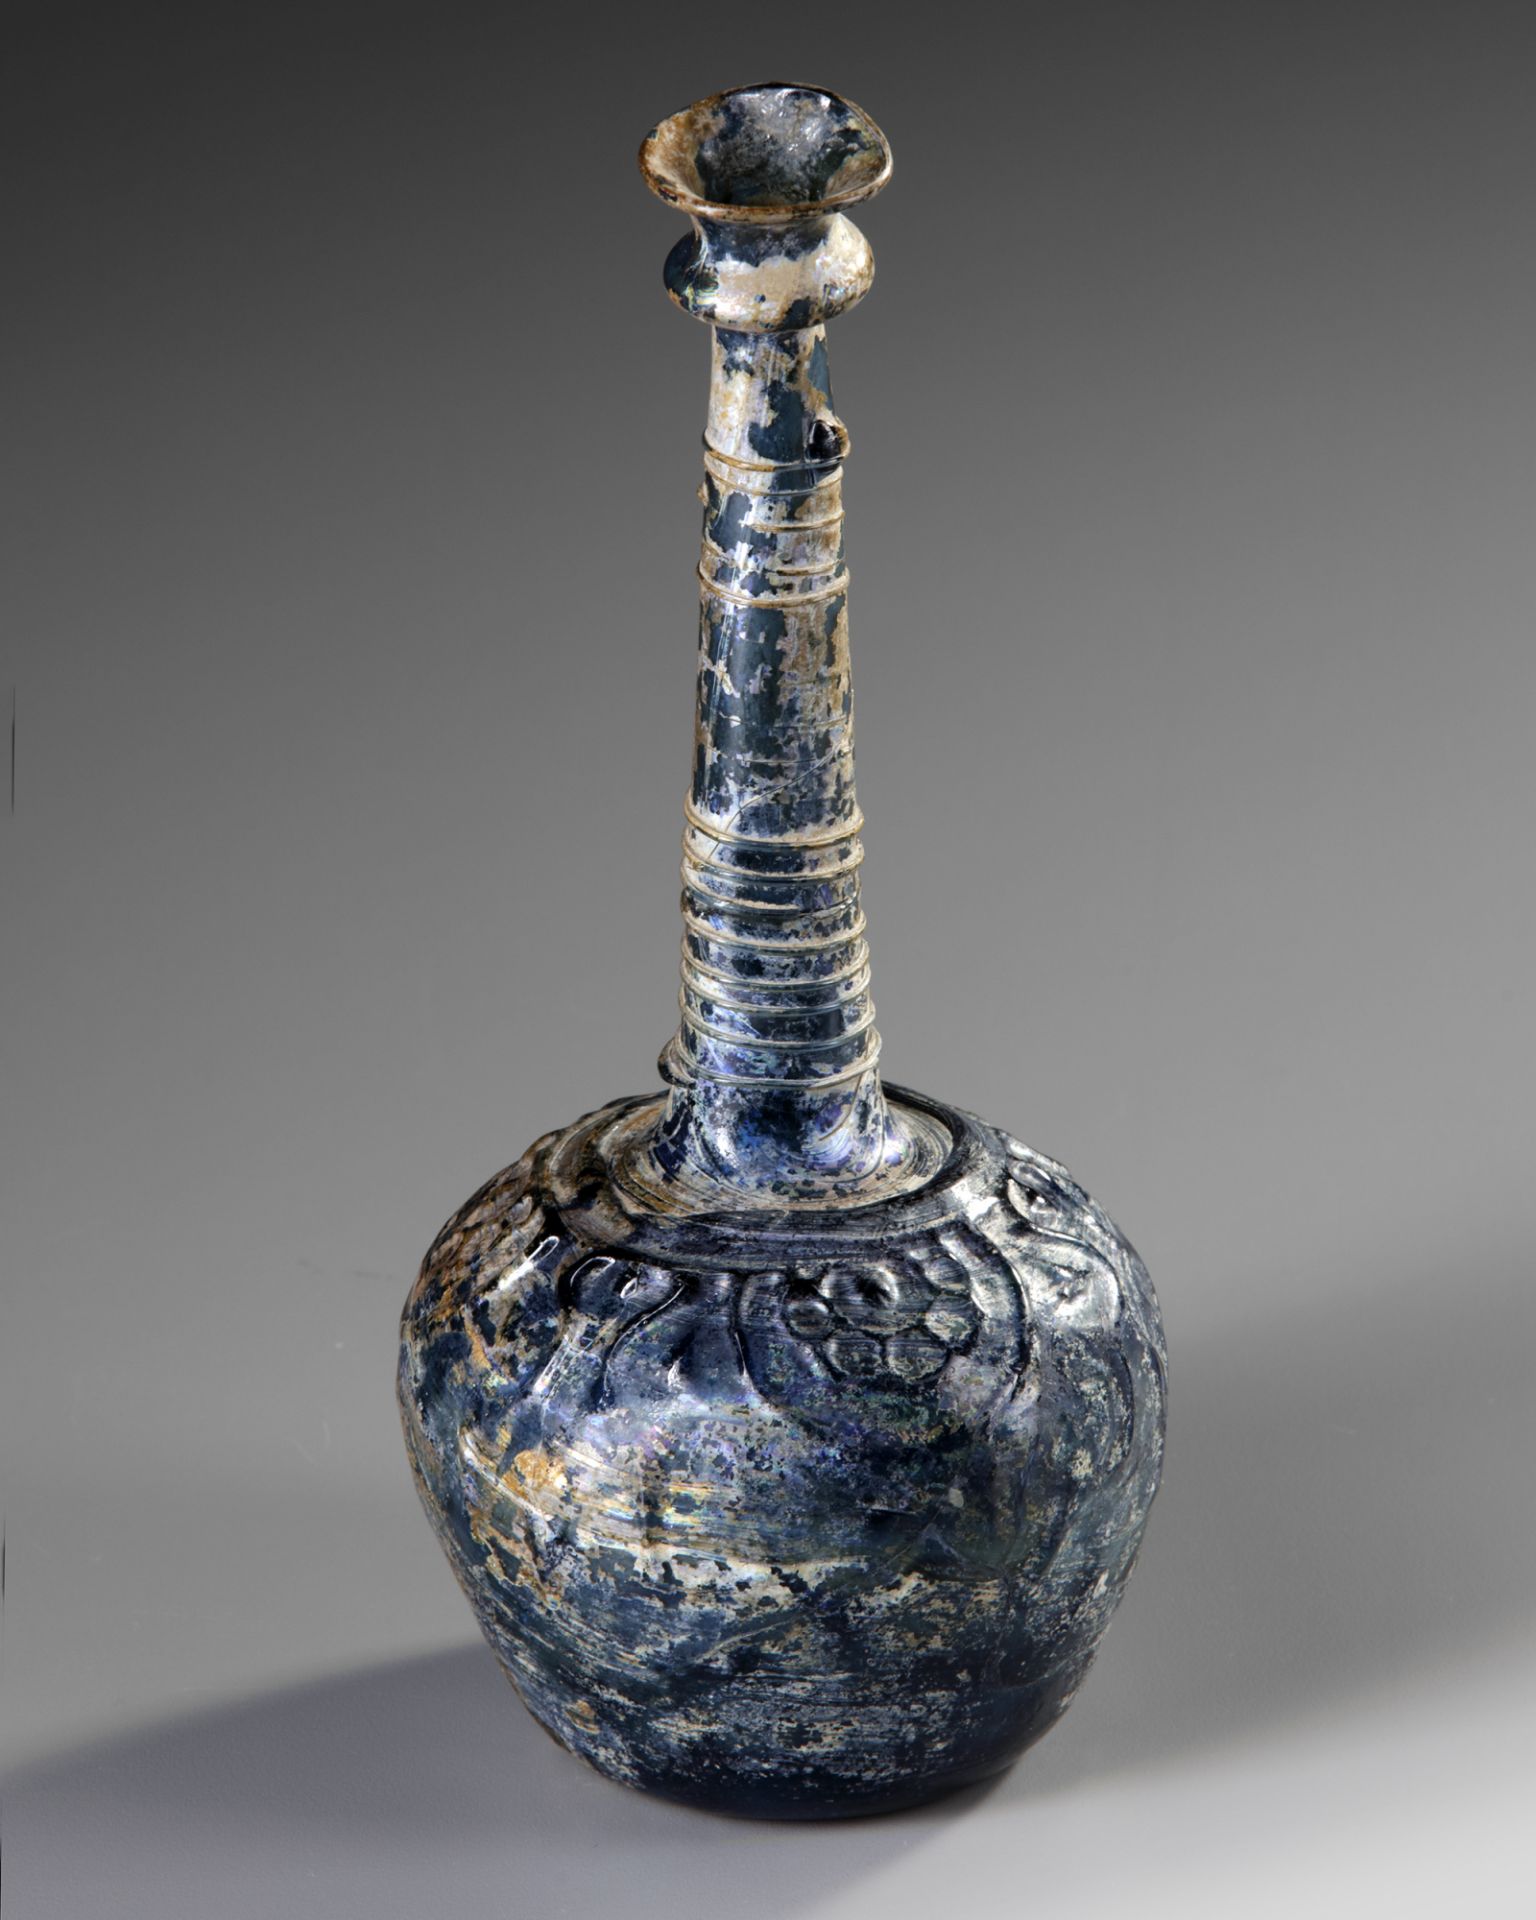 A TALL-NECKED BLUE GLASS BOTTLE, PERSIA OR SYRIA, 11TH-12TH CENTURY - Image 4 of 7